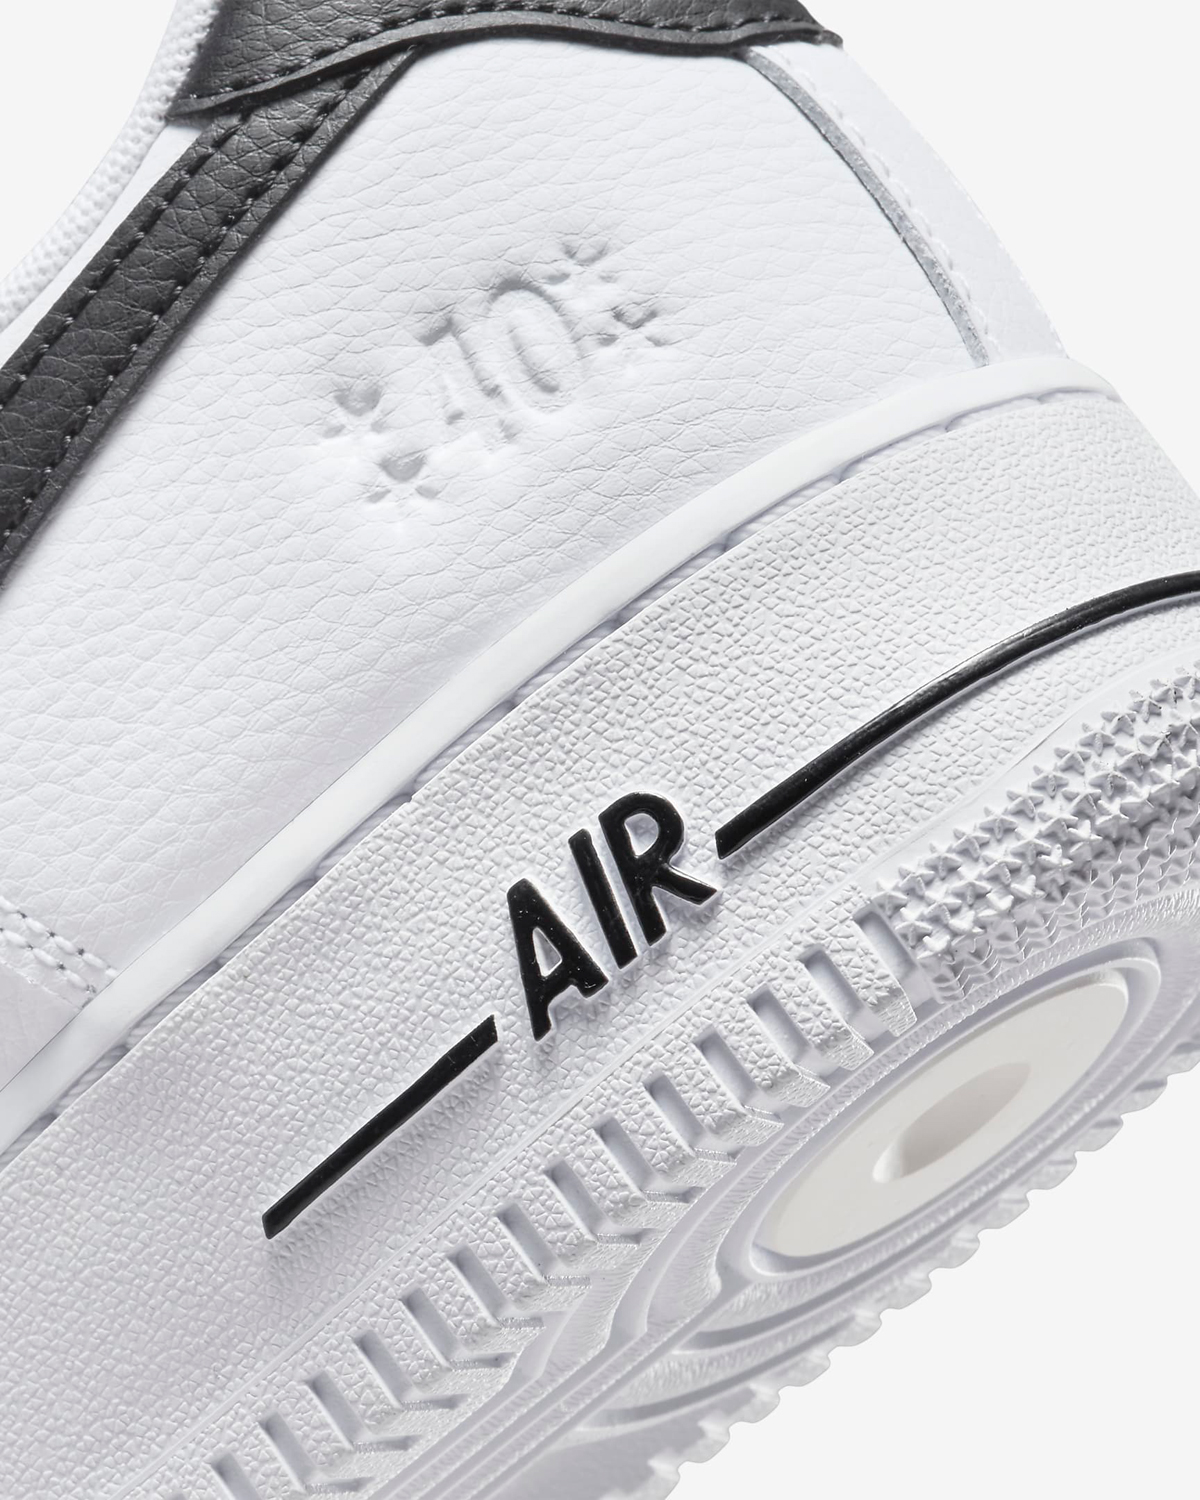 Nike-Air-Force-1-Low-40th-Anniversary-White-Black-Release-Date-9